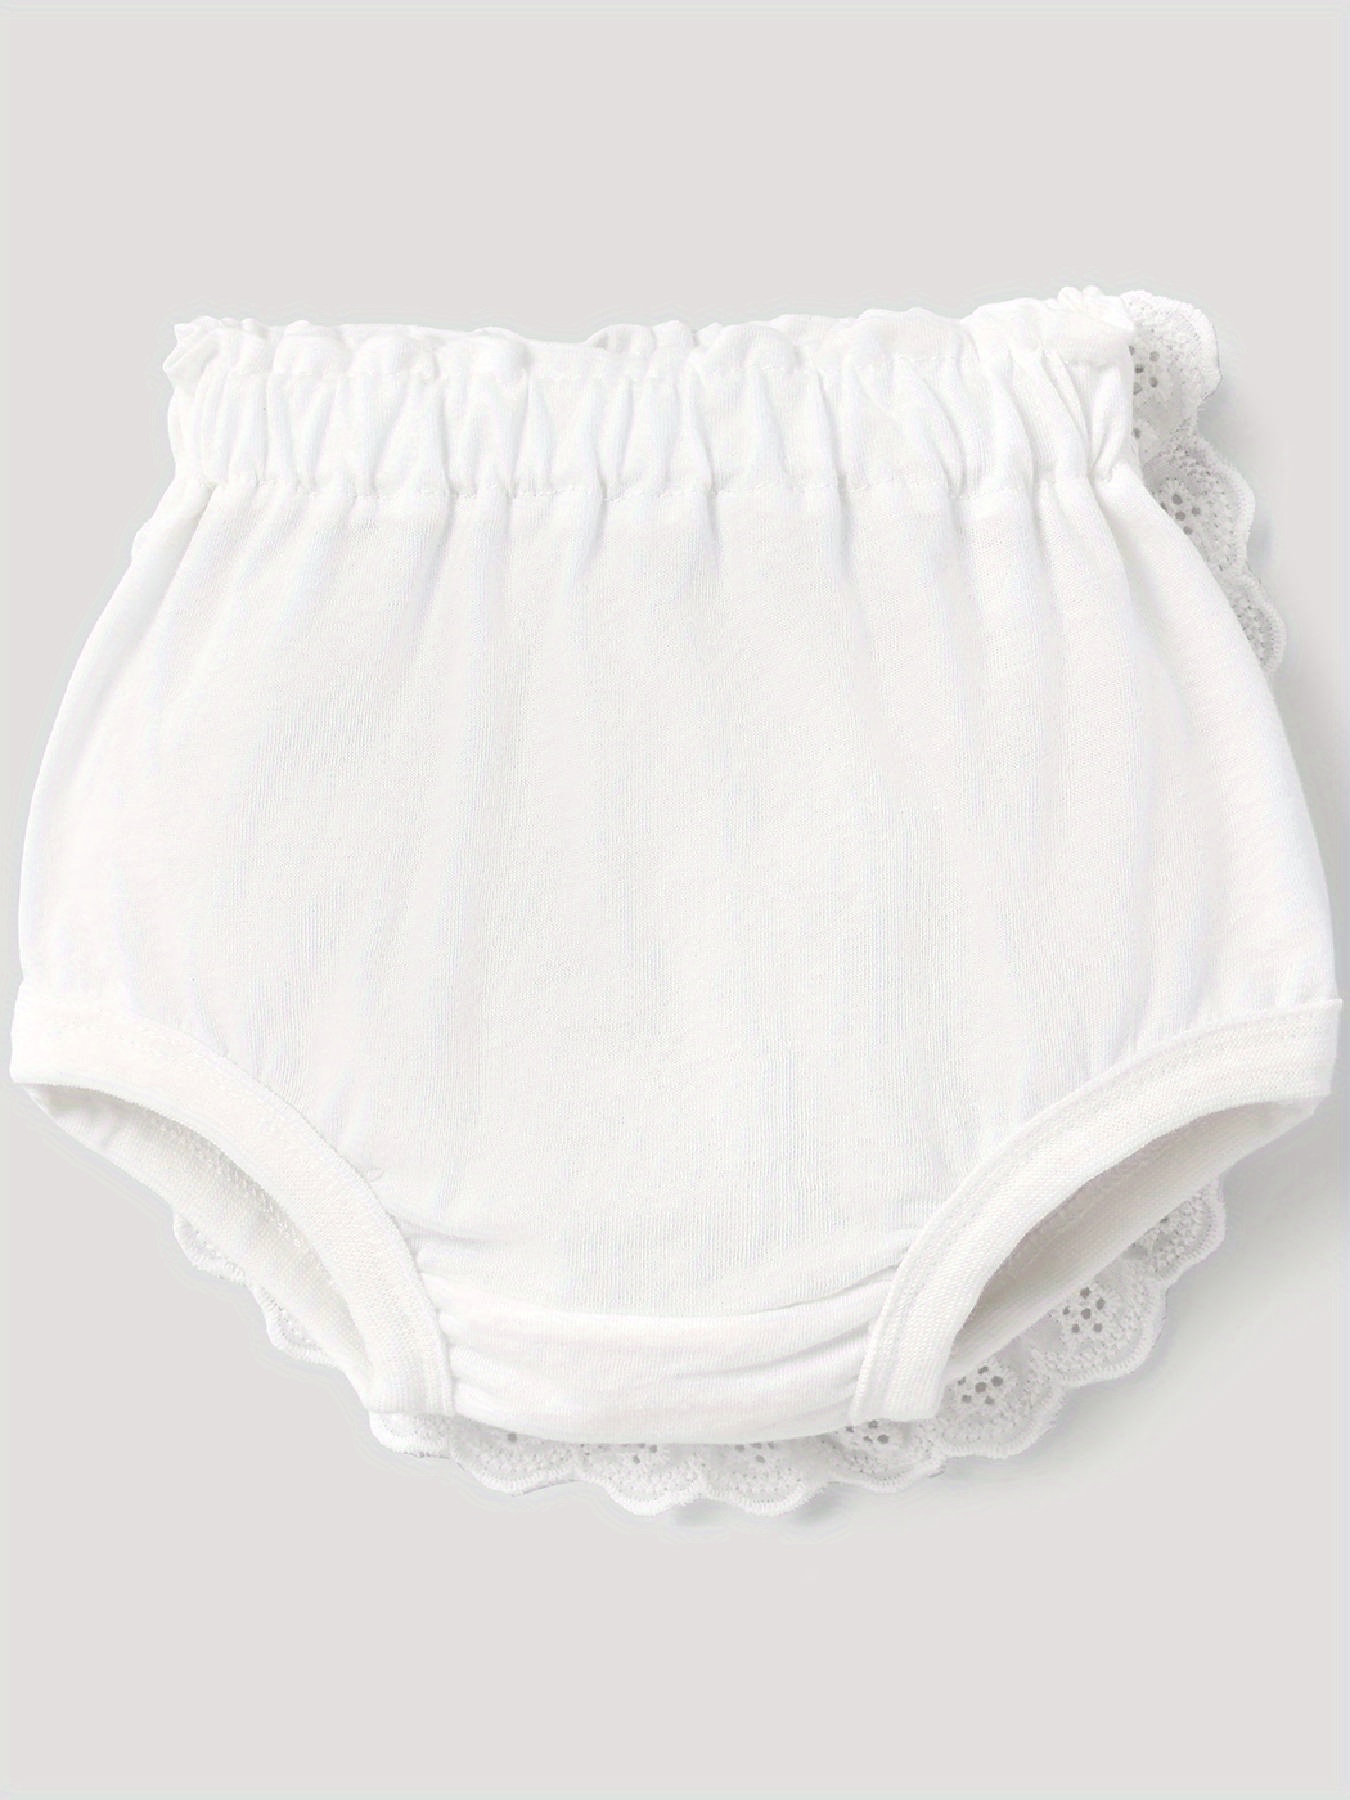 Buy Baby Girls Bloomers, Diaper Covers & Underwear at Best Price